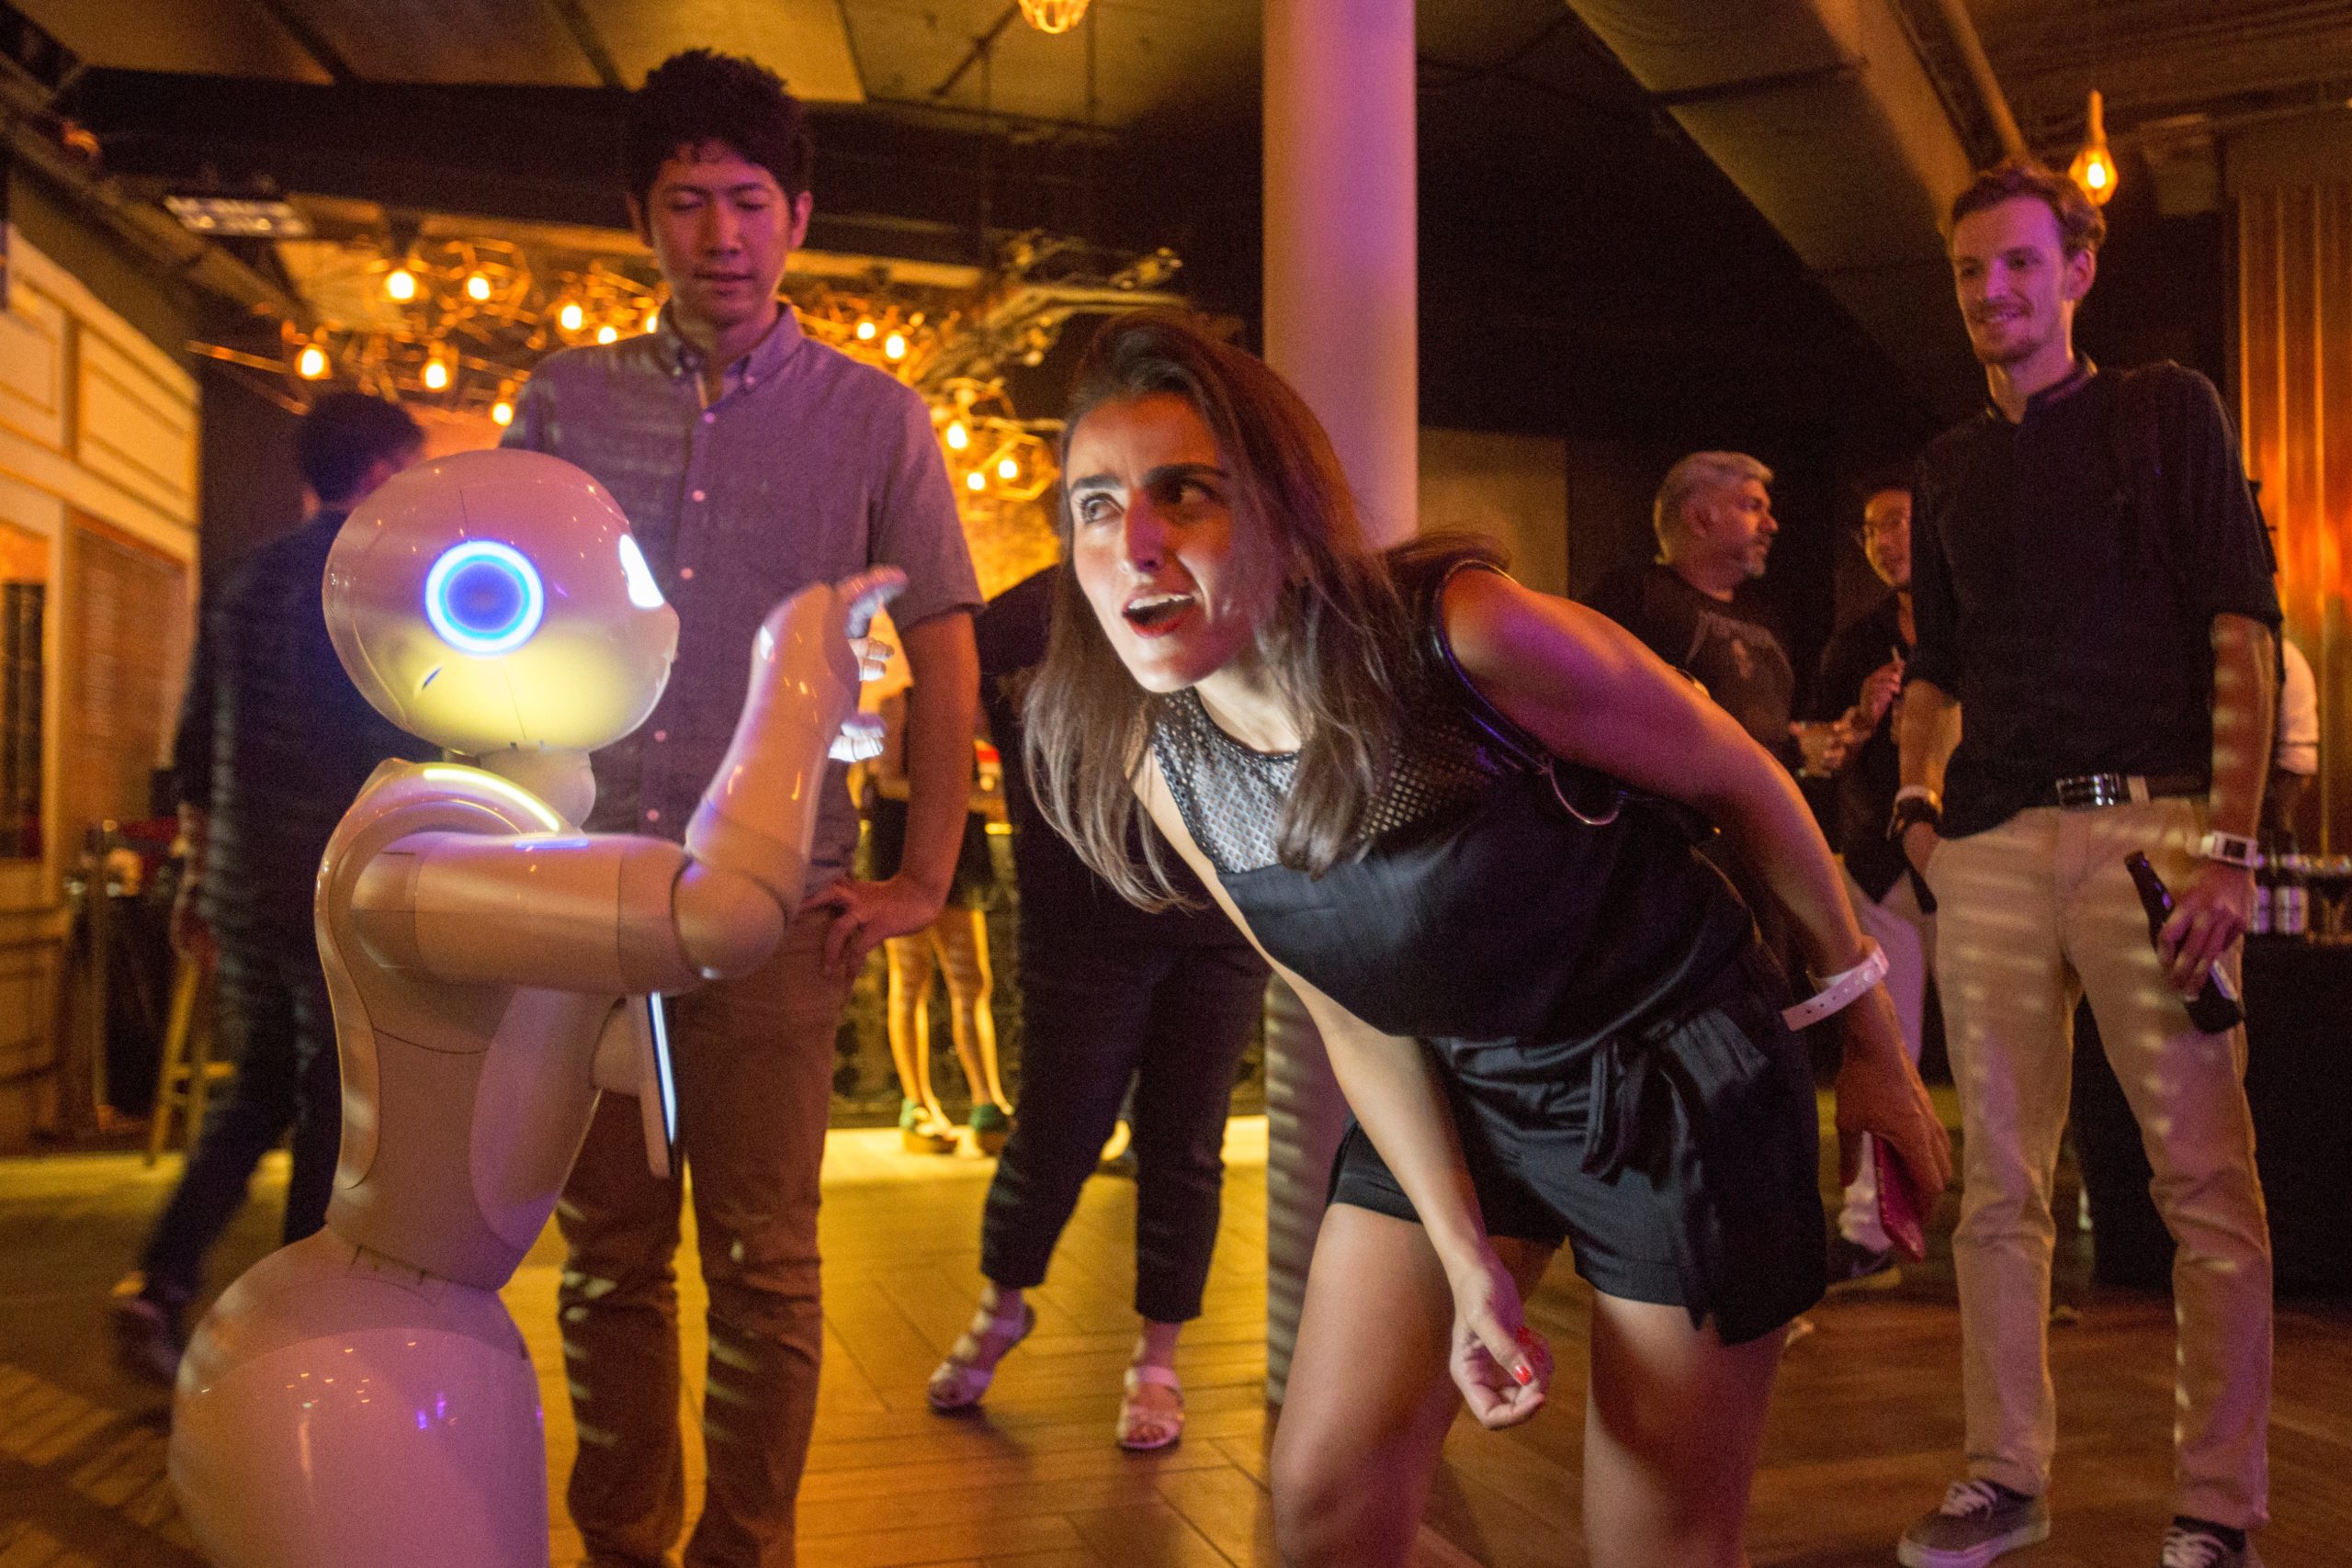 Pepper interacts with guests at the Dentsu party during the Spikes Asia Festival of Creativity on September 10, 2015 in Singapore. (Photo: Charles Pertwee, Getty Images)